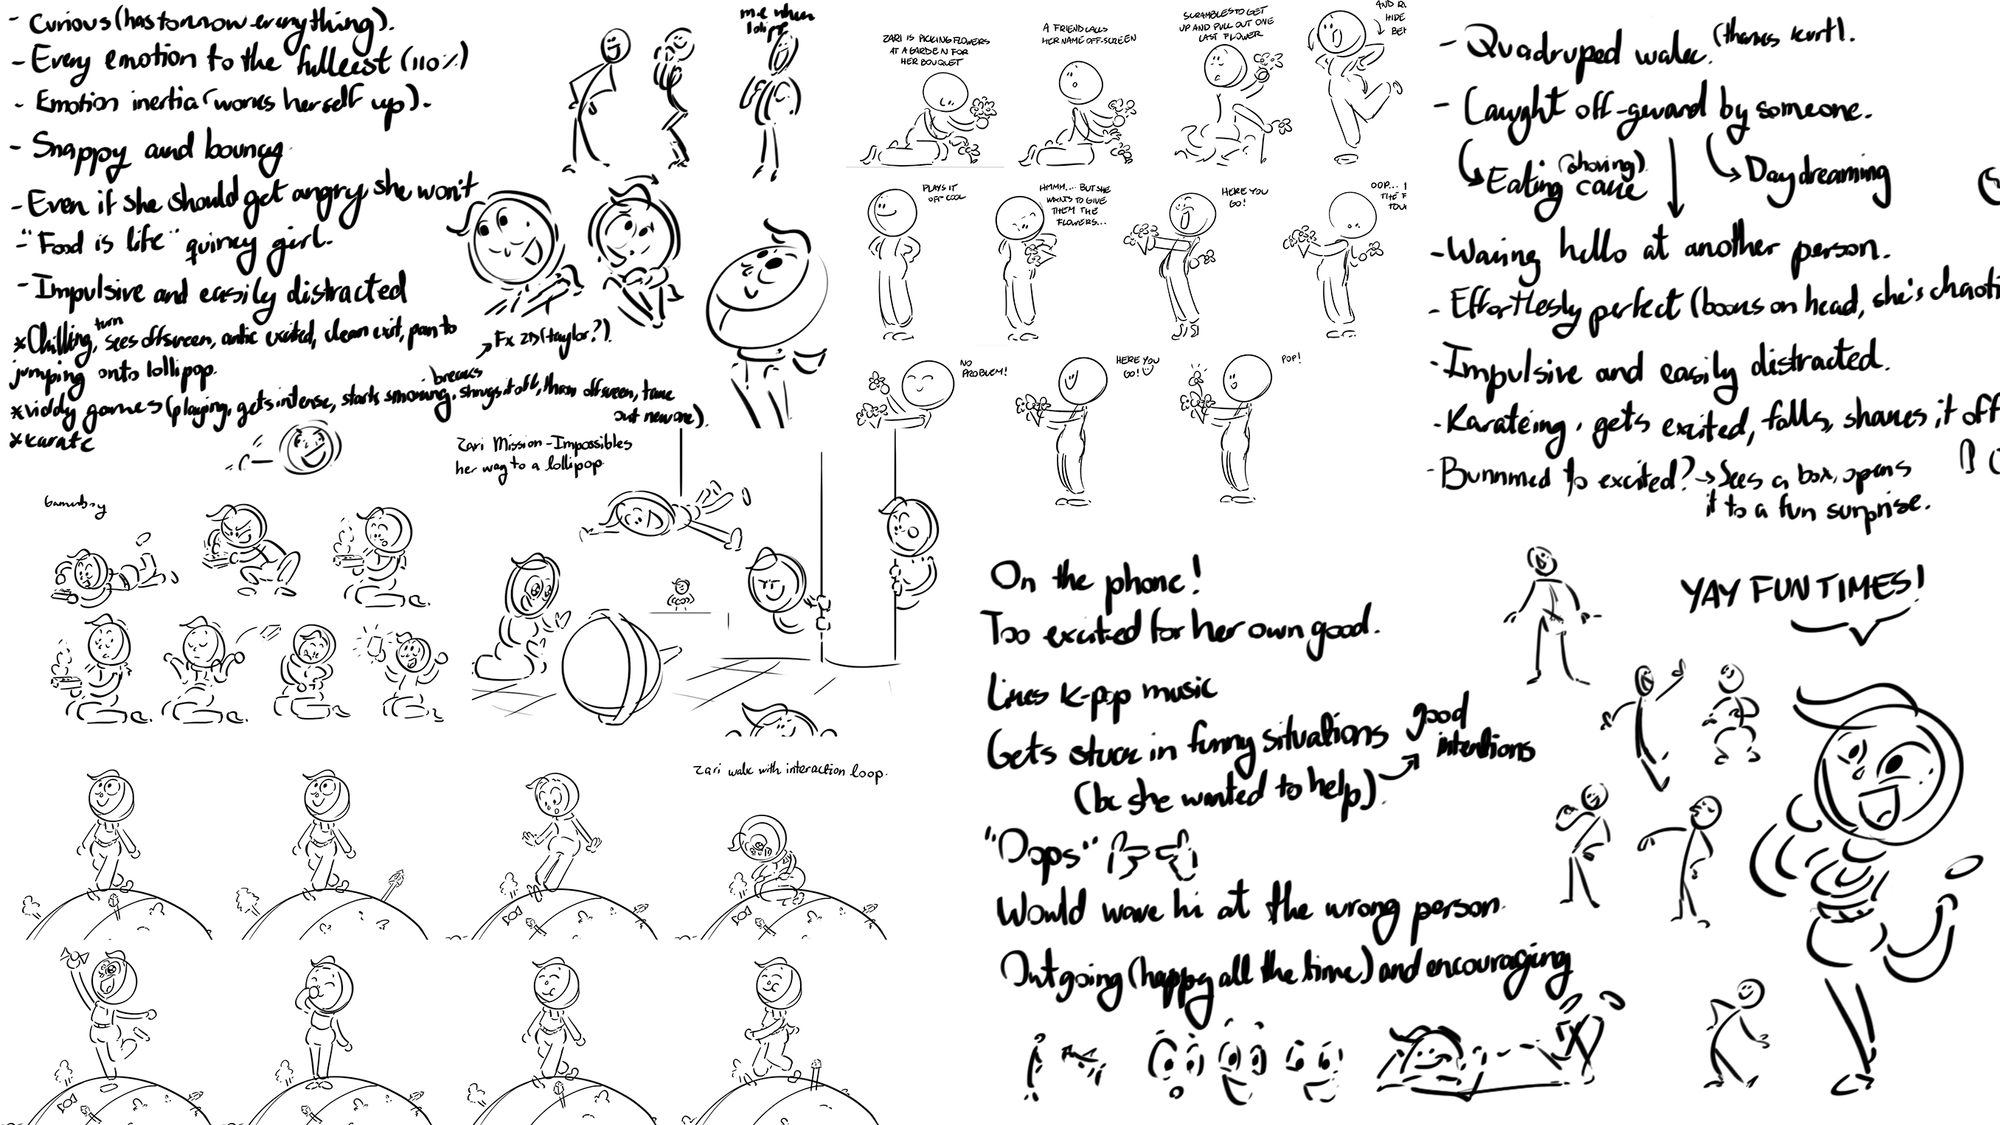 A page of sketches and brainstormed storylines for Zari